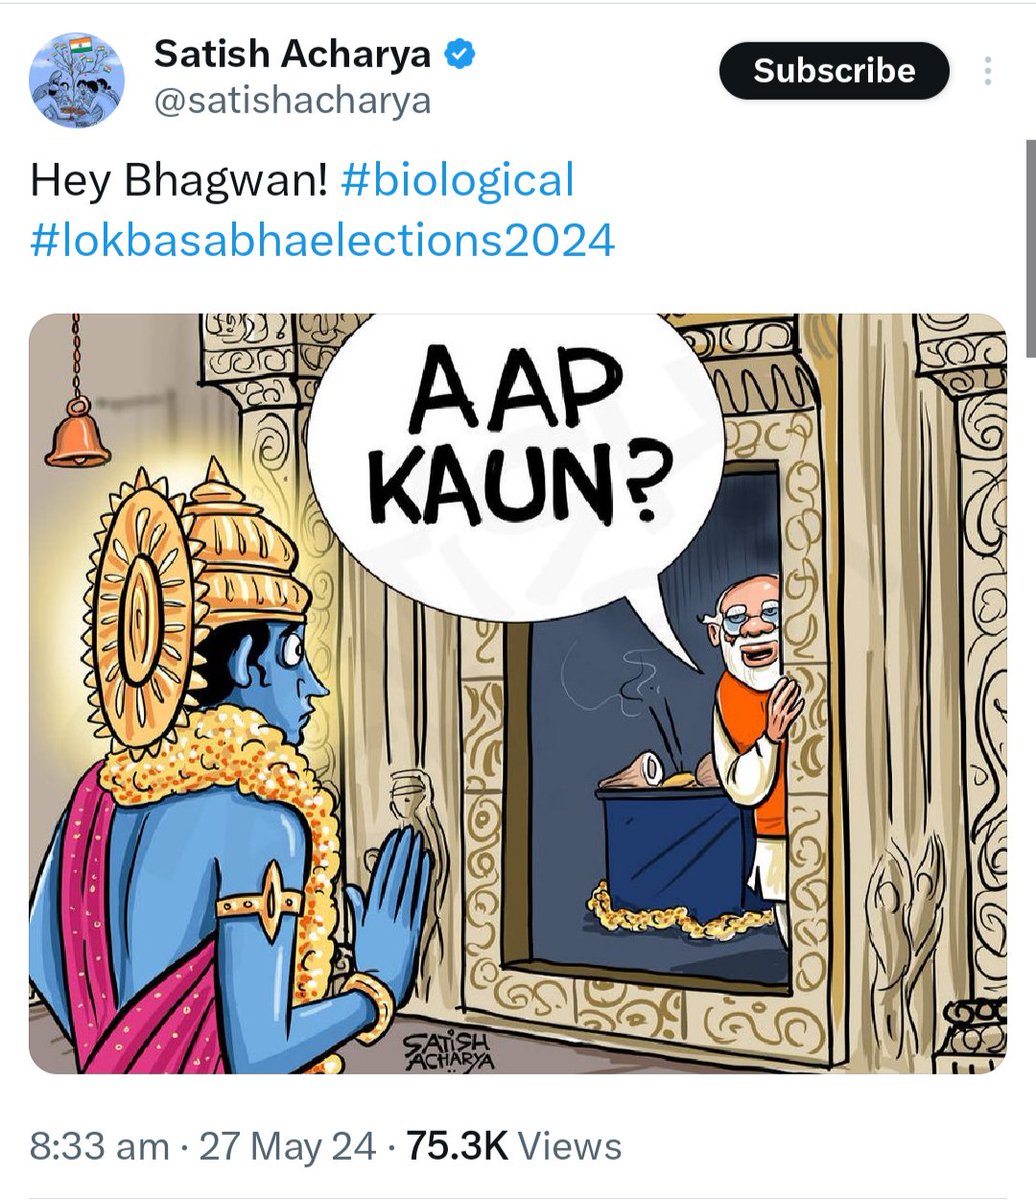 This is unacceptable. This Congressi slave @satishacharya has crossed all the limits this time. This is an insult of our Aradhya Prabhu Shri Ram...

Can anyone get away by making similar cartoons on other communities?